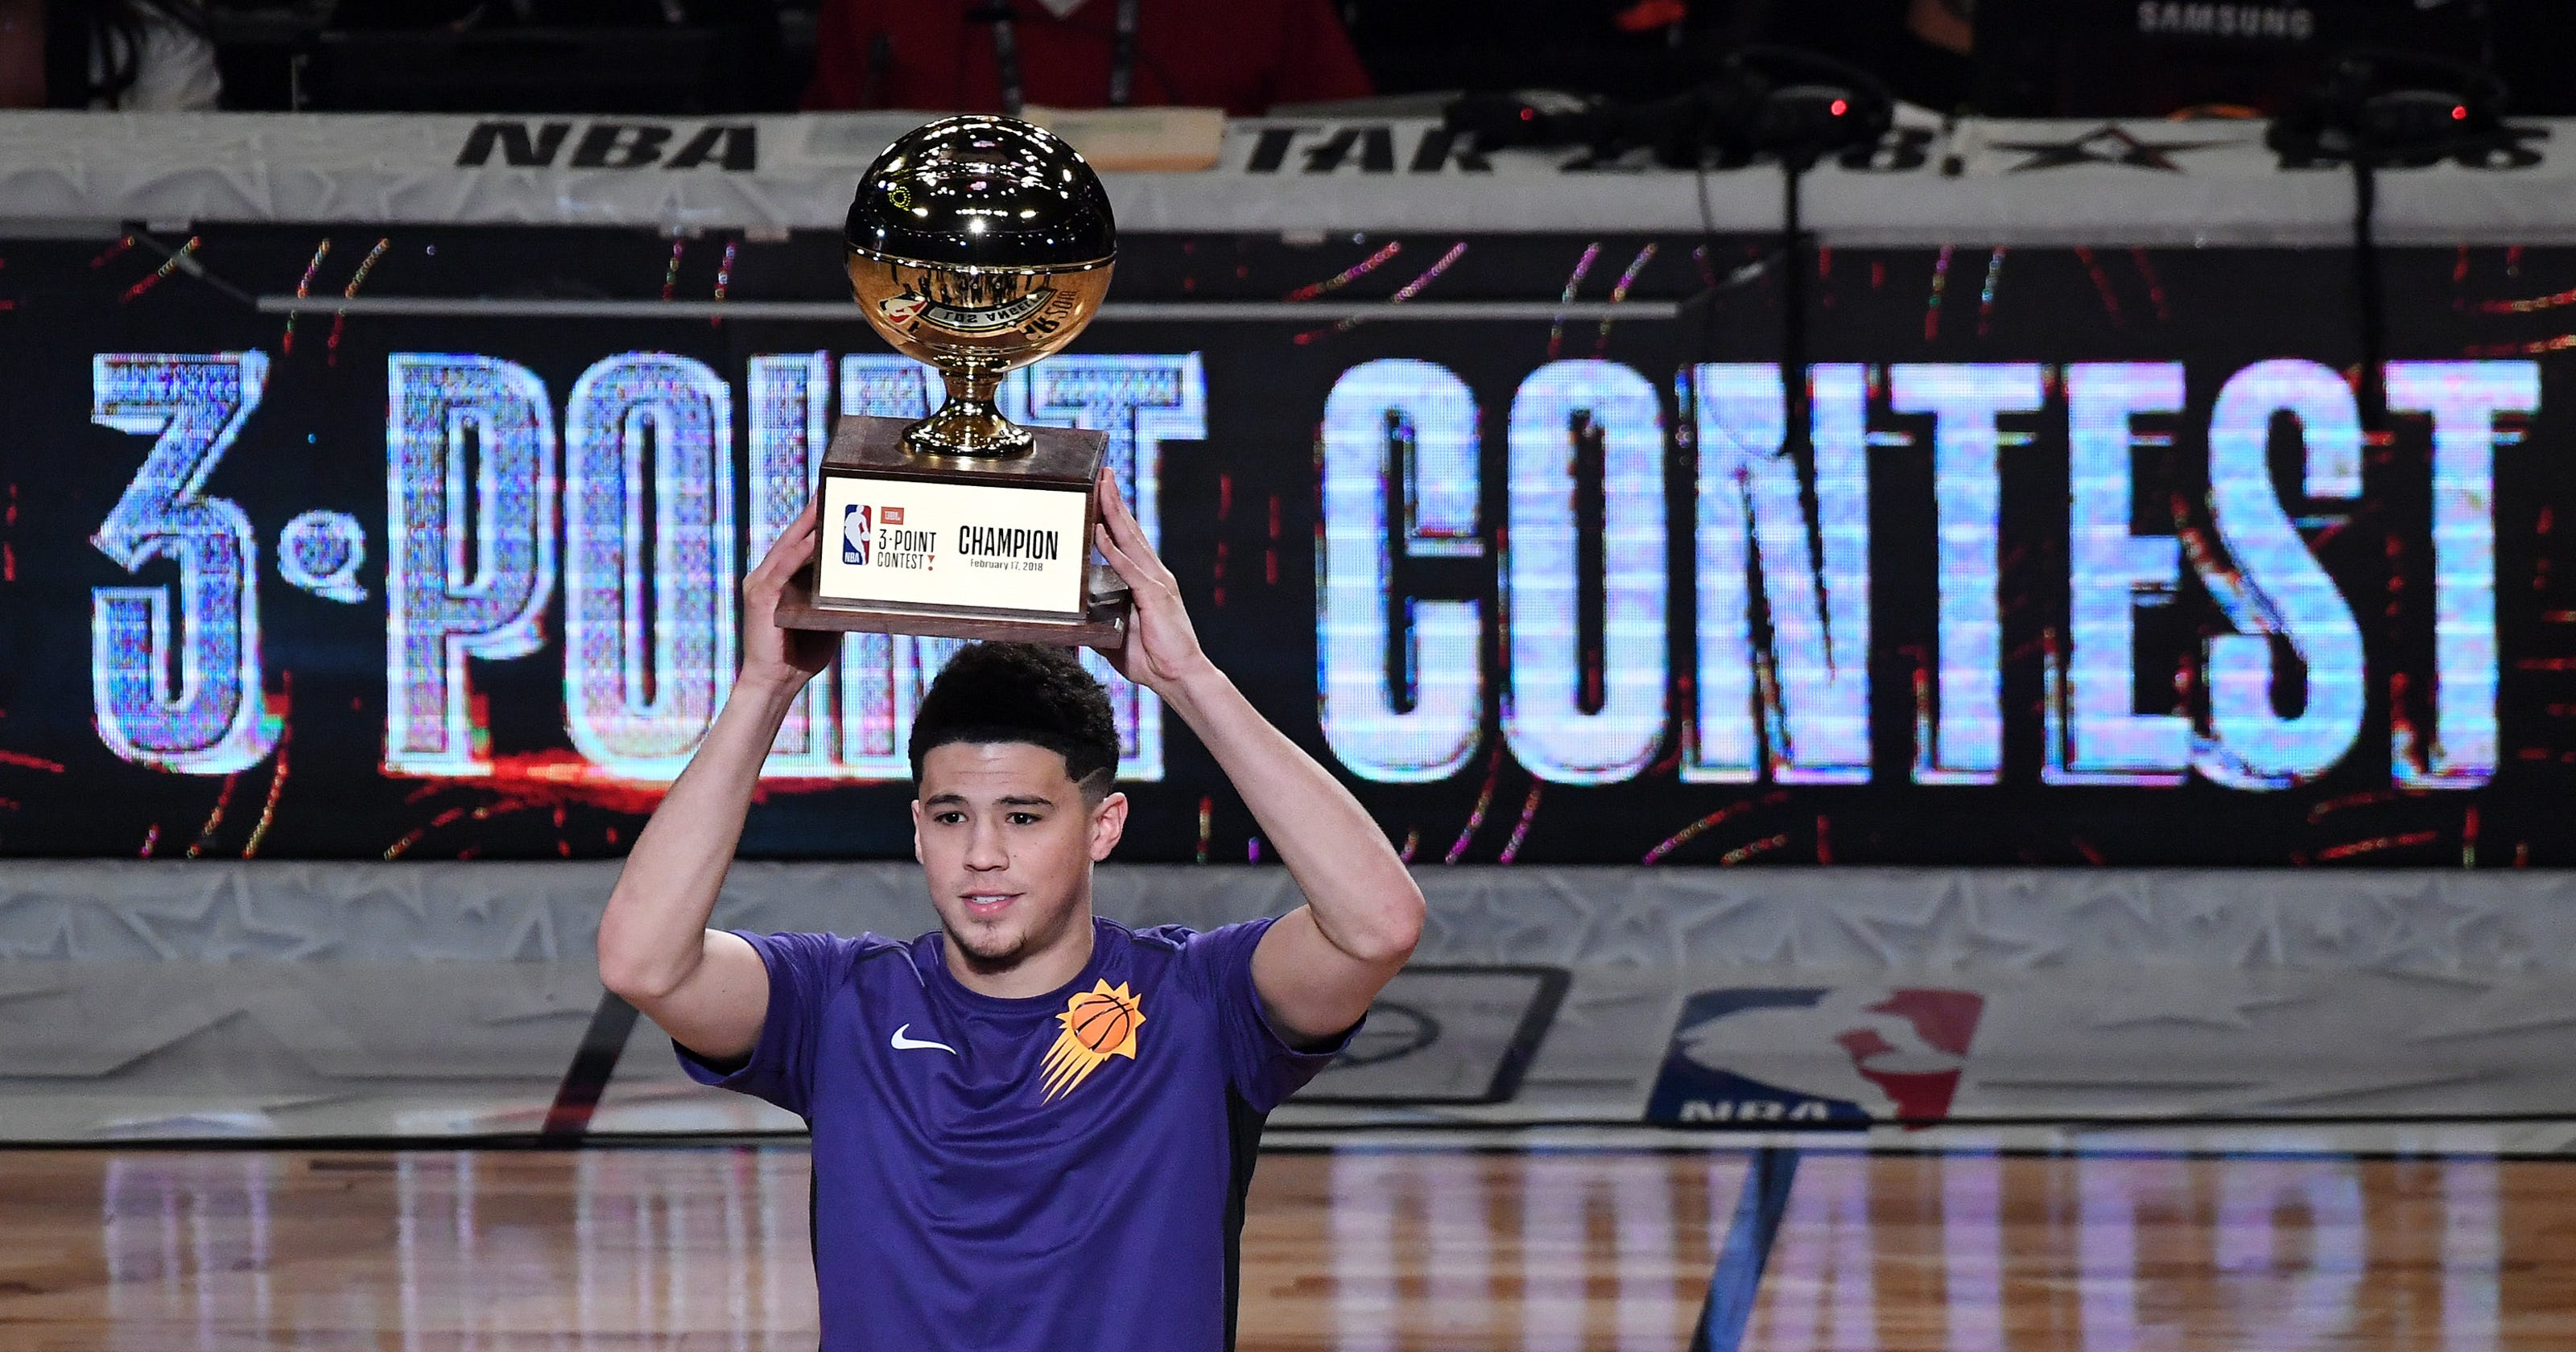 NBA 3-Point Contest: Devin Booker to defend title vs. Curry brothers